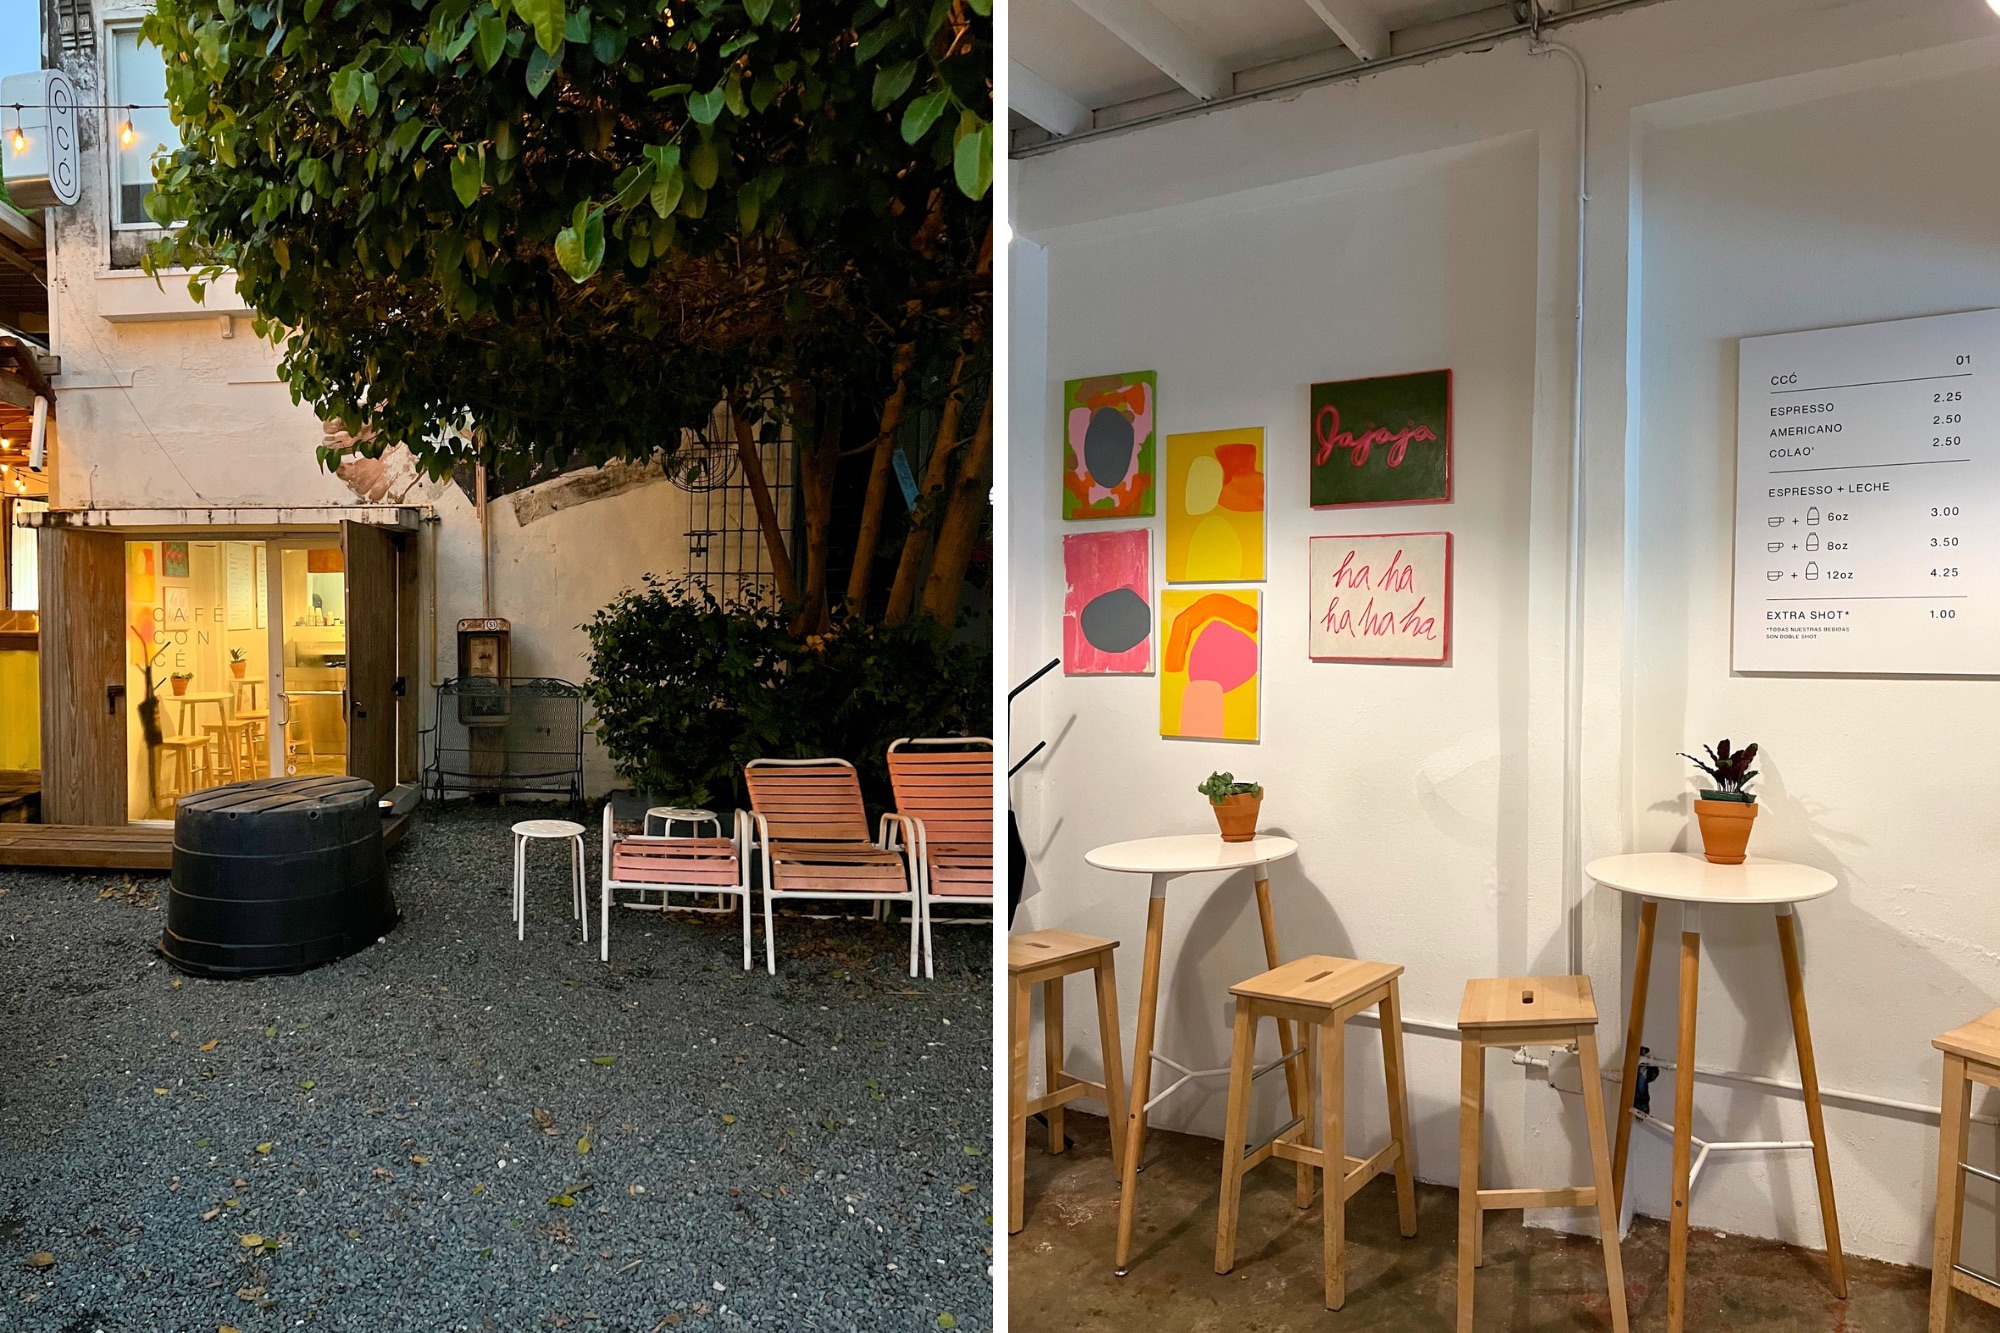 Exterior and interior of Cafe con Ce in San Juan